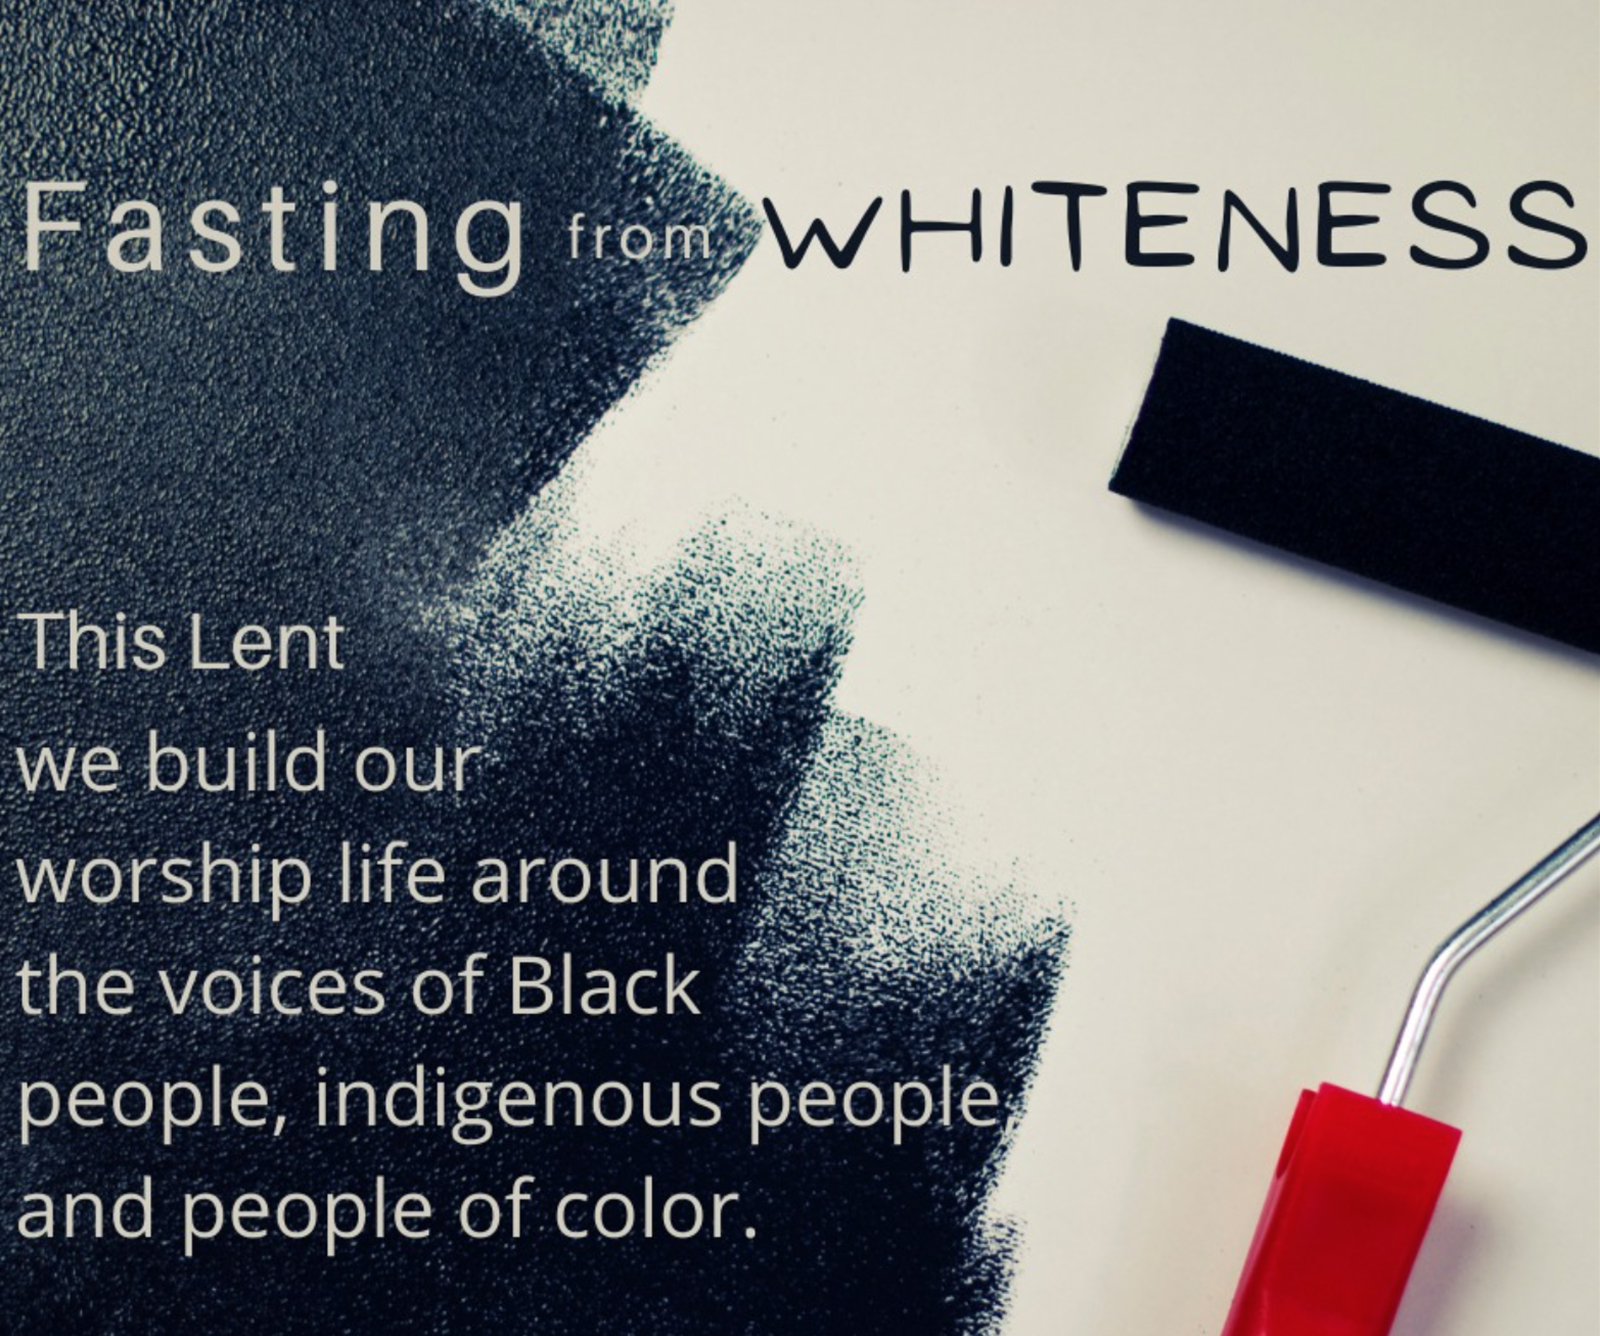 Poster for First United Church of Oak Park's Lenten theme: Fasting from Whiteness. Courtesy image